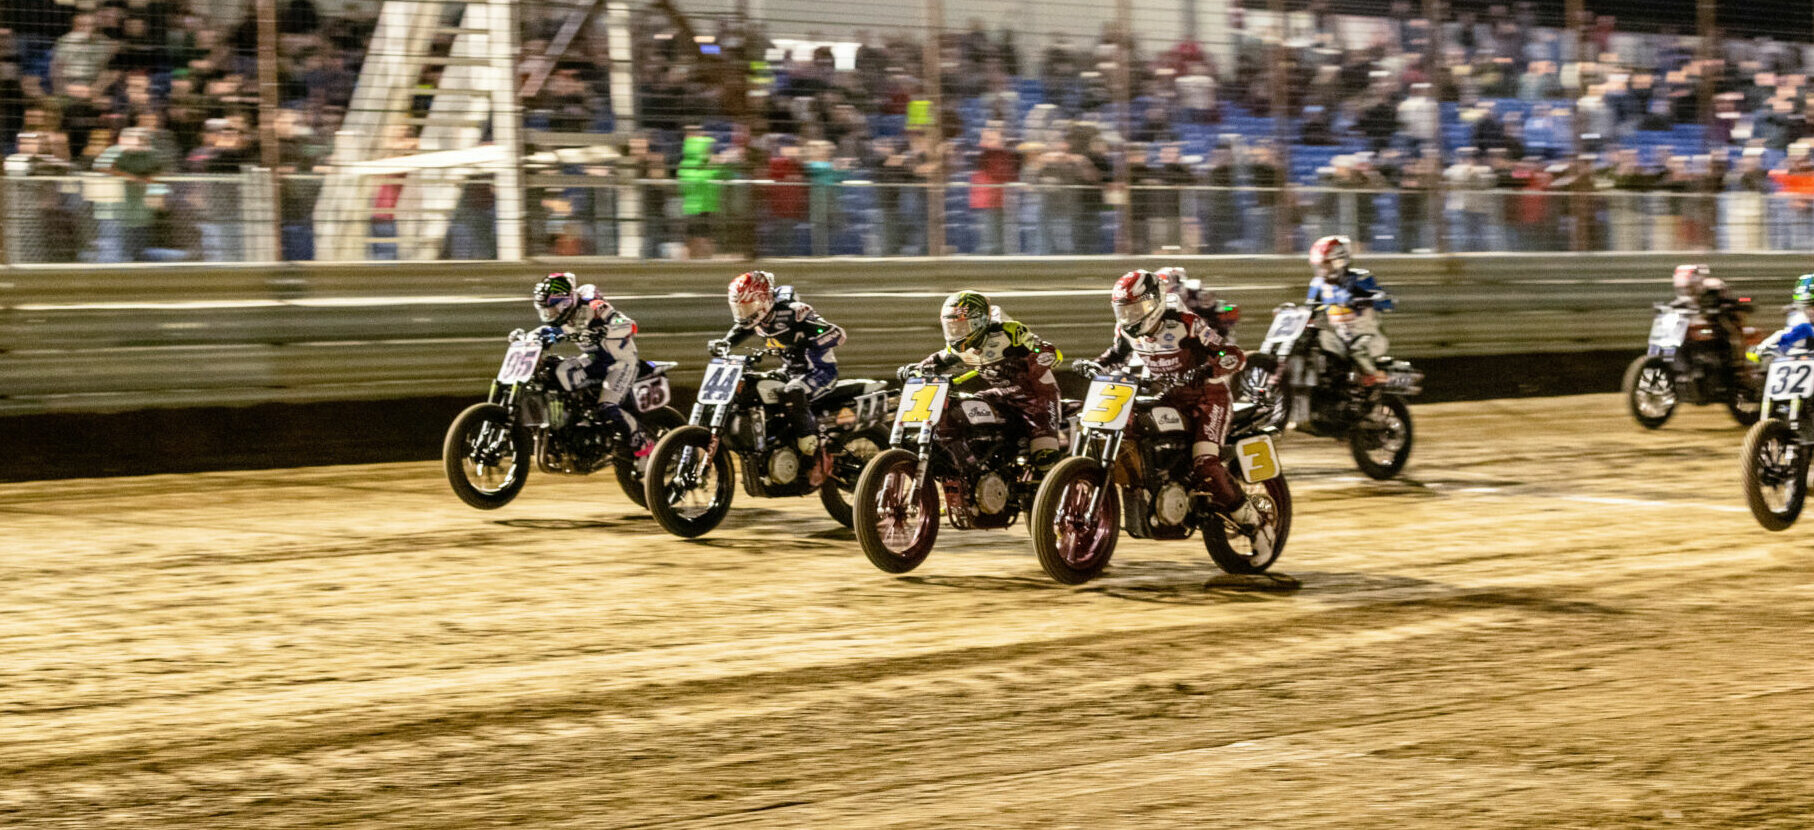 The start of the AFT SuperTwins main event at the I-70 Half-Mile in 2022 with Briar Bauman (3), Jared Mees (1), Brandon Robinson (44), and JD Beach (95) leading the charge from the front row. Photo by Tim Lester, courtesy AFT.